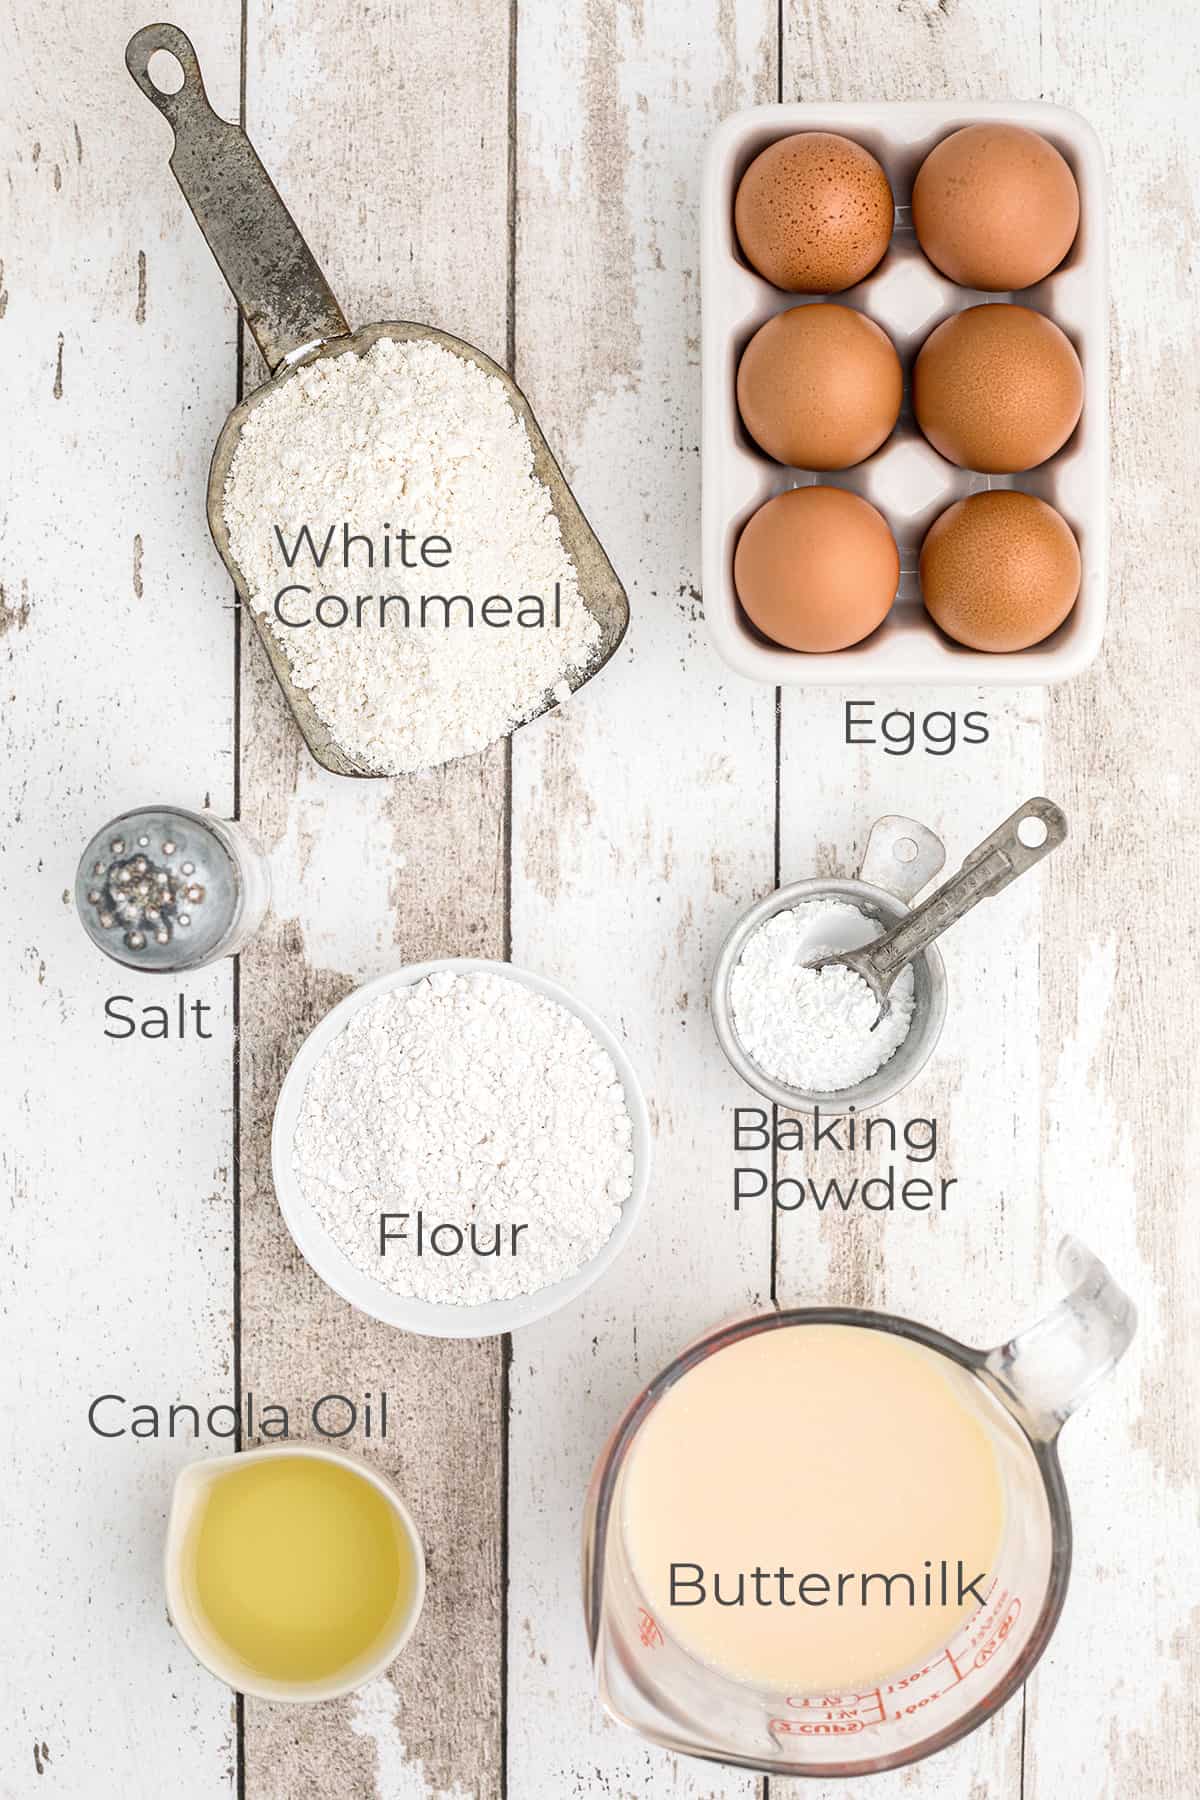 All ingredients needed to make old fashioned cornbread.